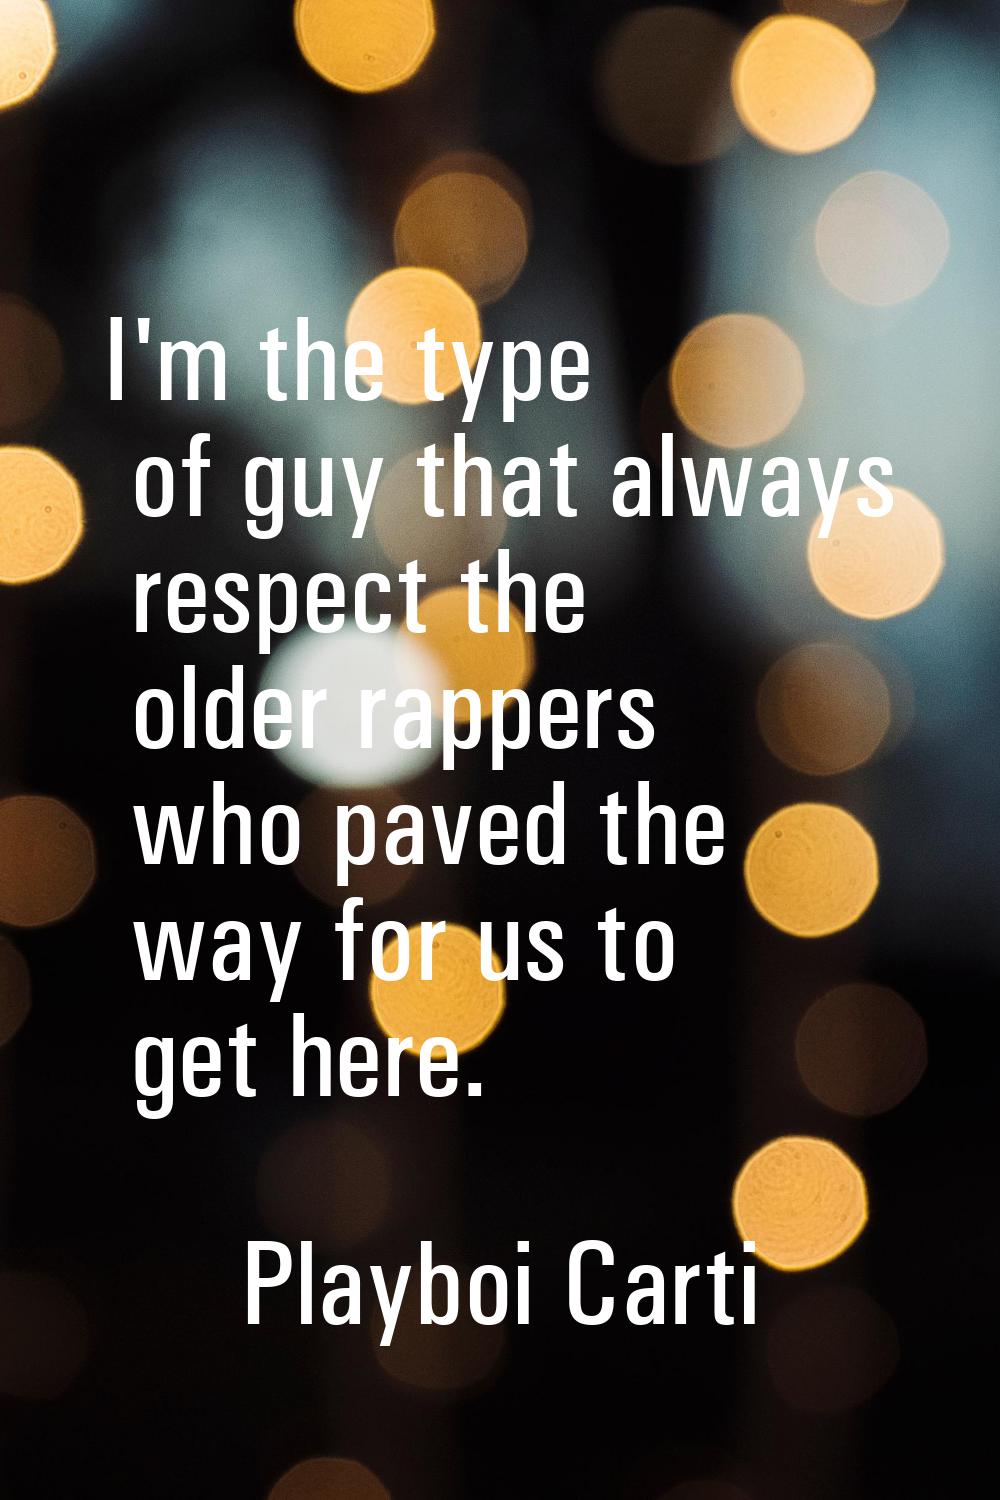 I'm the type of guy that always respect the older rappers who paved the way for us to get here.